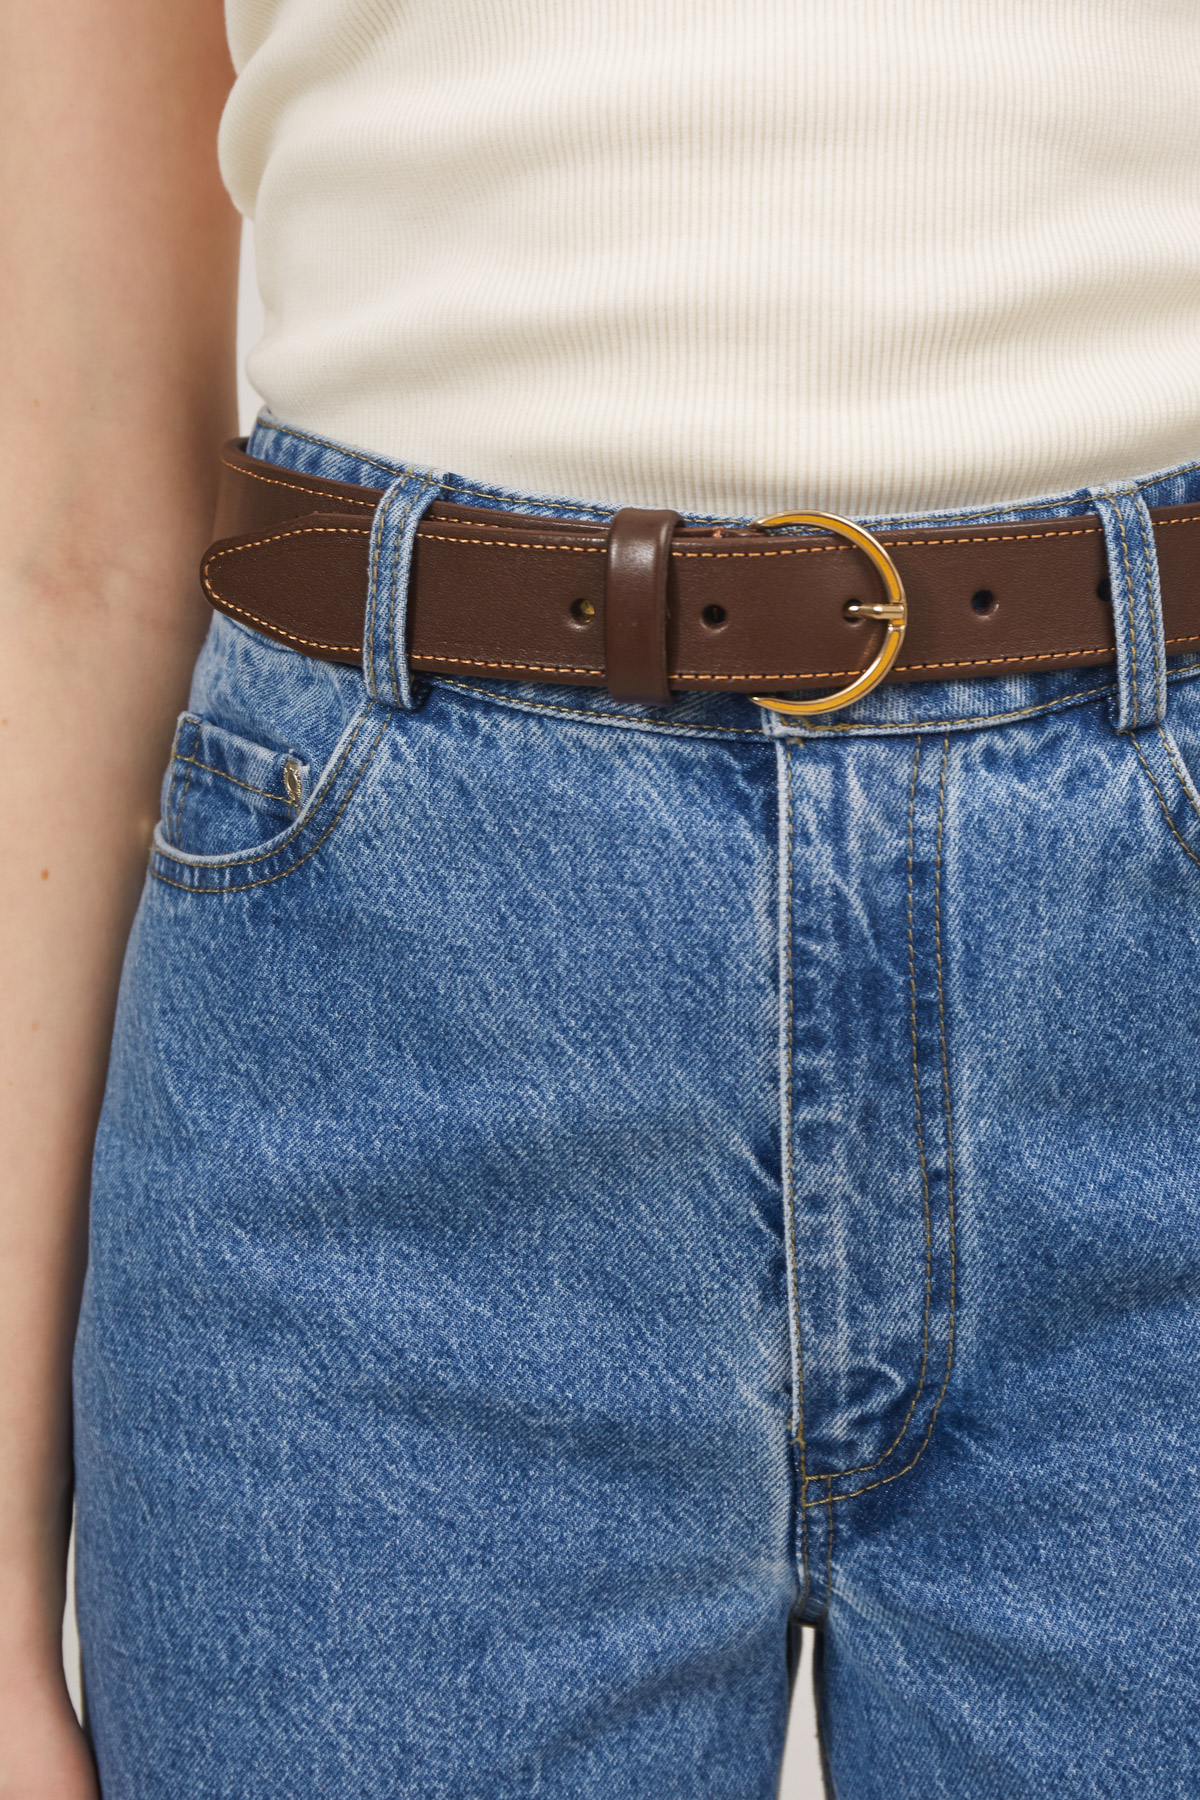 Brown leather belt with round metal buckle, photo 3